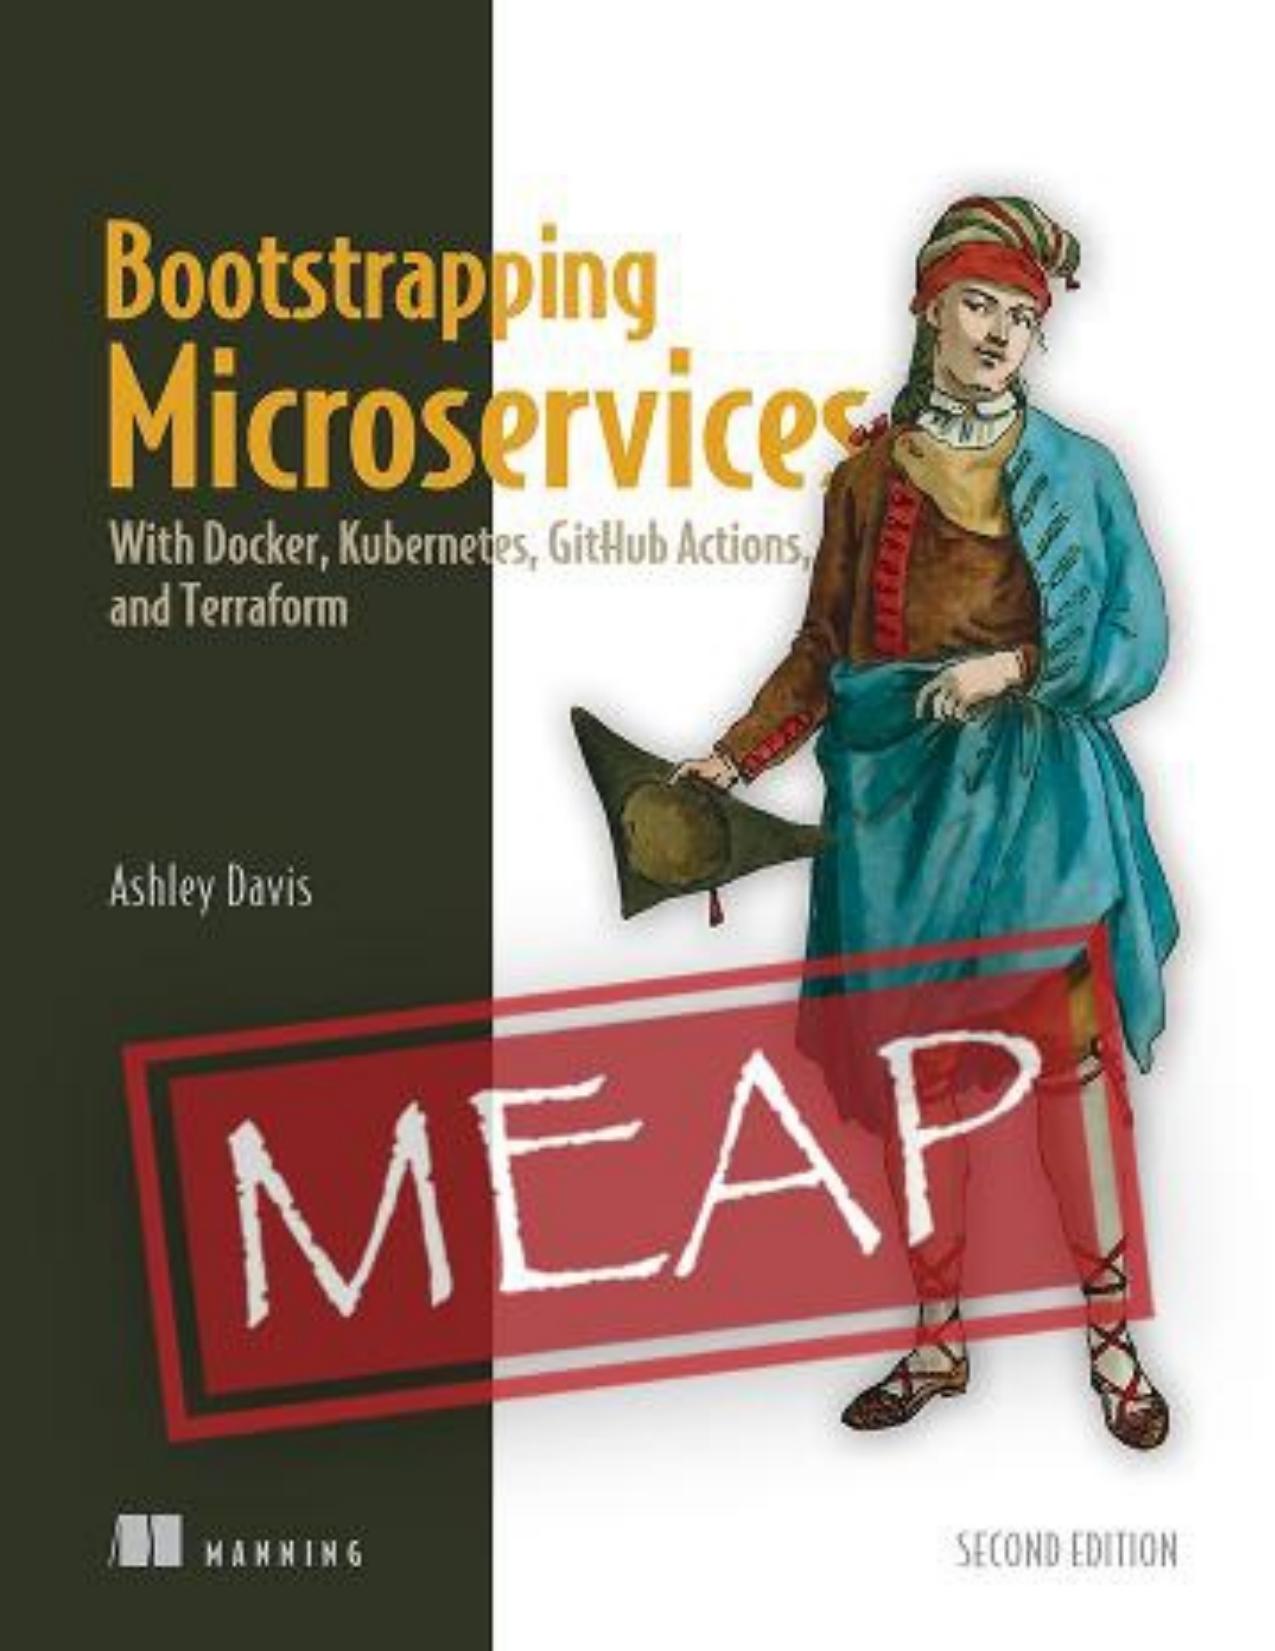 Bootstrapping Microservices With Docker, Kubernetes, and Terraform